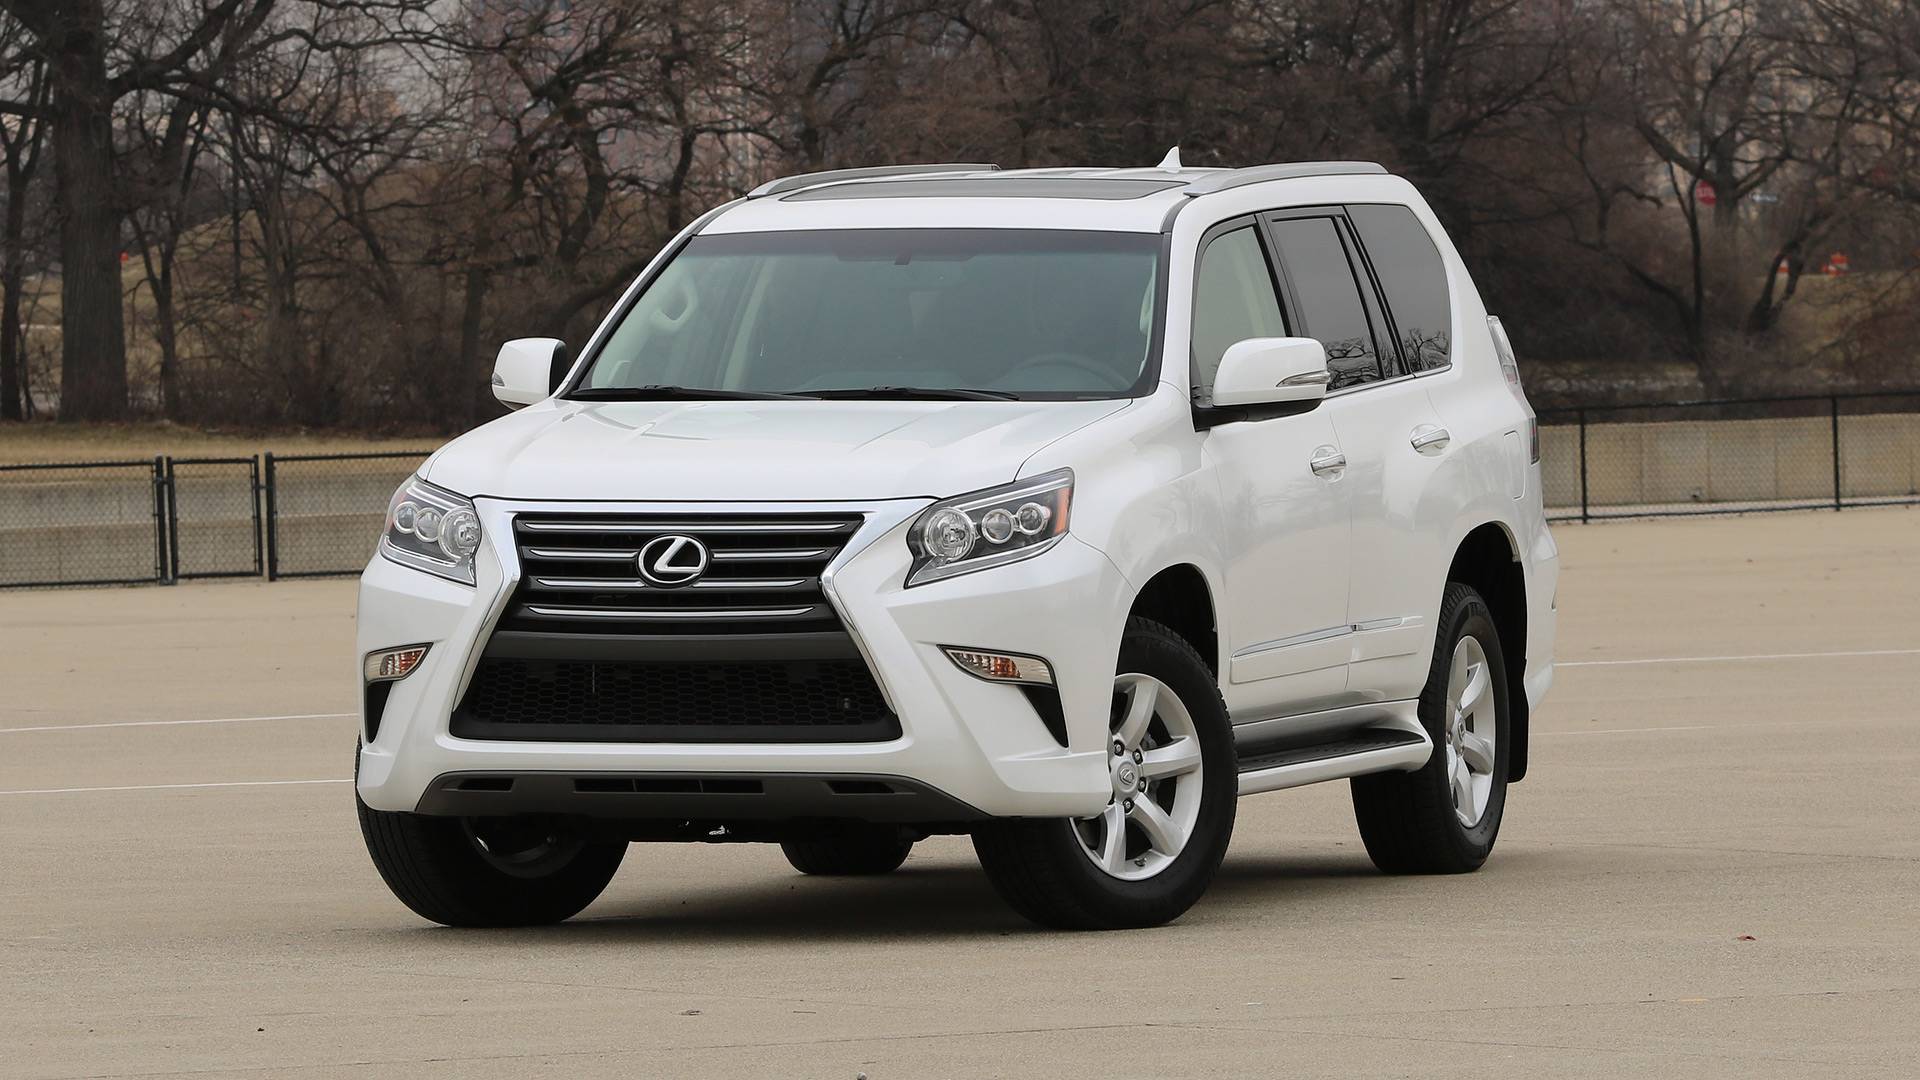 2018 Lexus GX 460 Review: Old-School And Proud